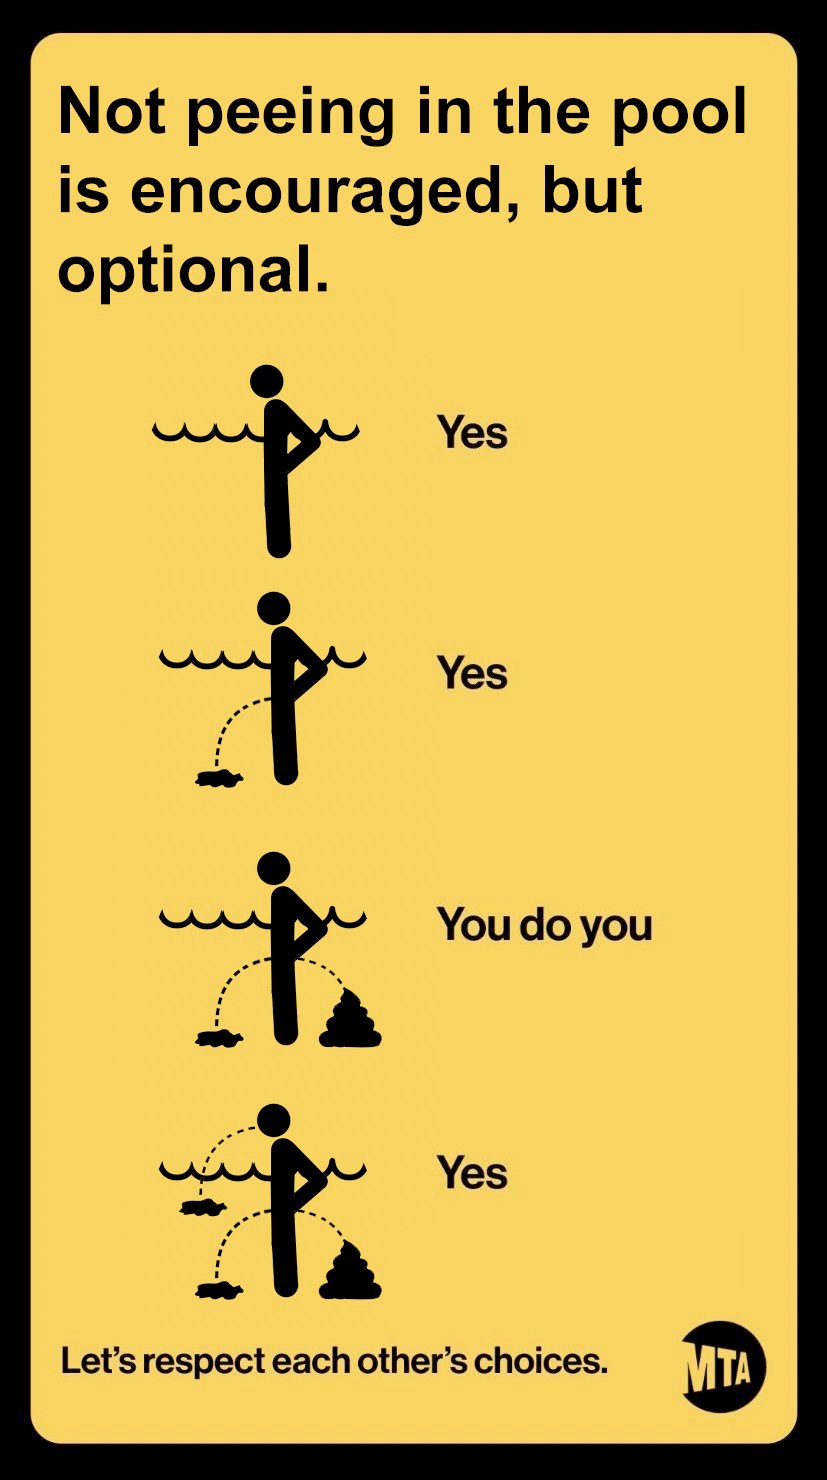 @rafaelshimunov tweeted this one, it’s a series of stick people depicted peeing and pooping into the pool, and the caption reads Not peeing in the pool is encouraged but optional let’s respect each other’s choices